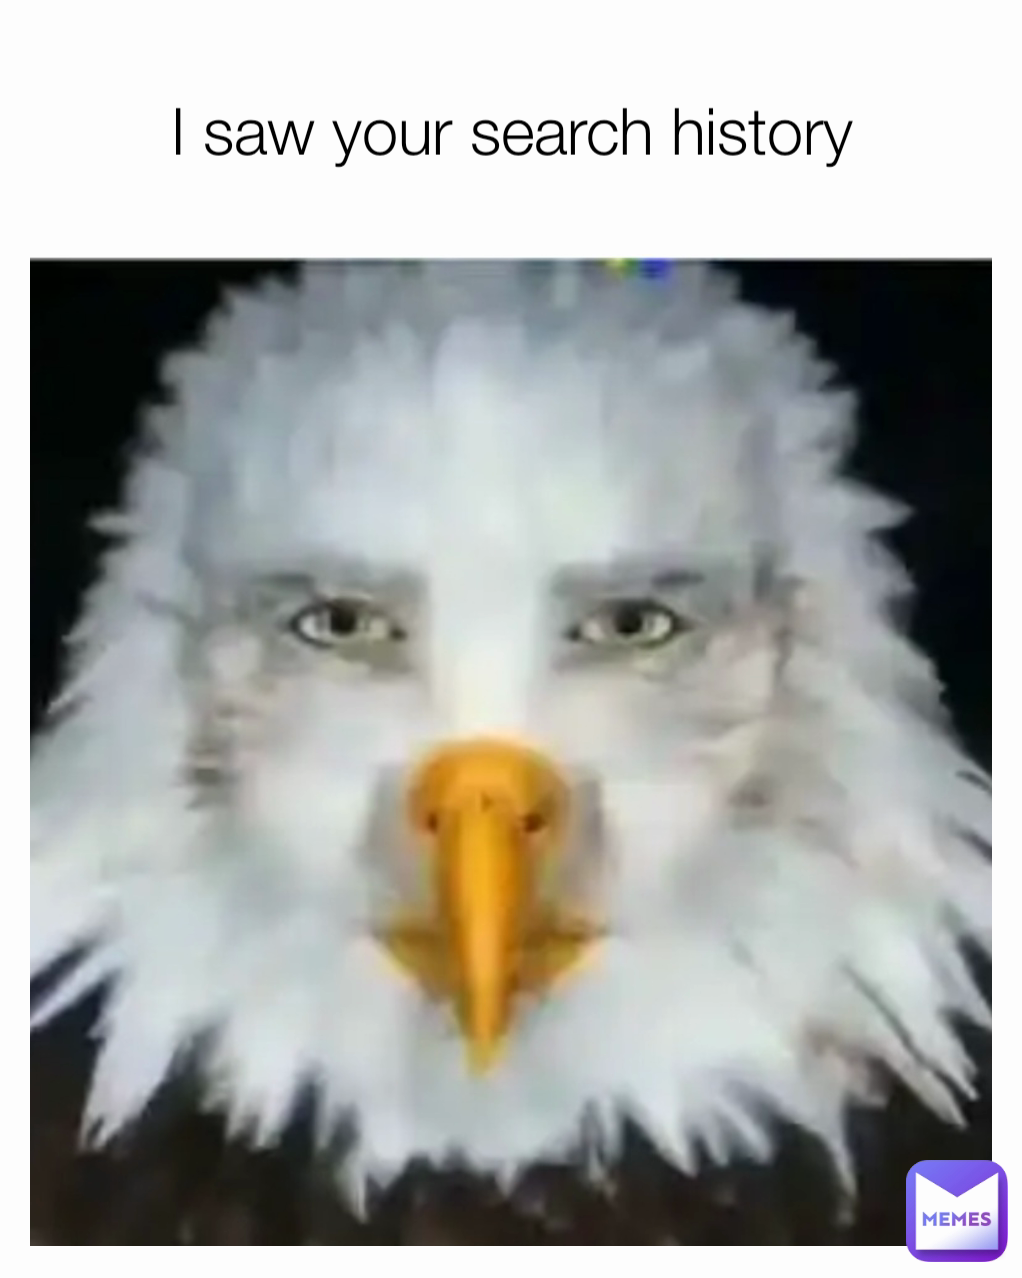 I saw your search history